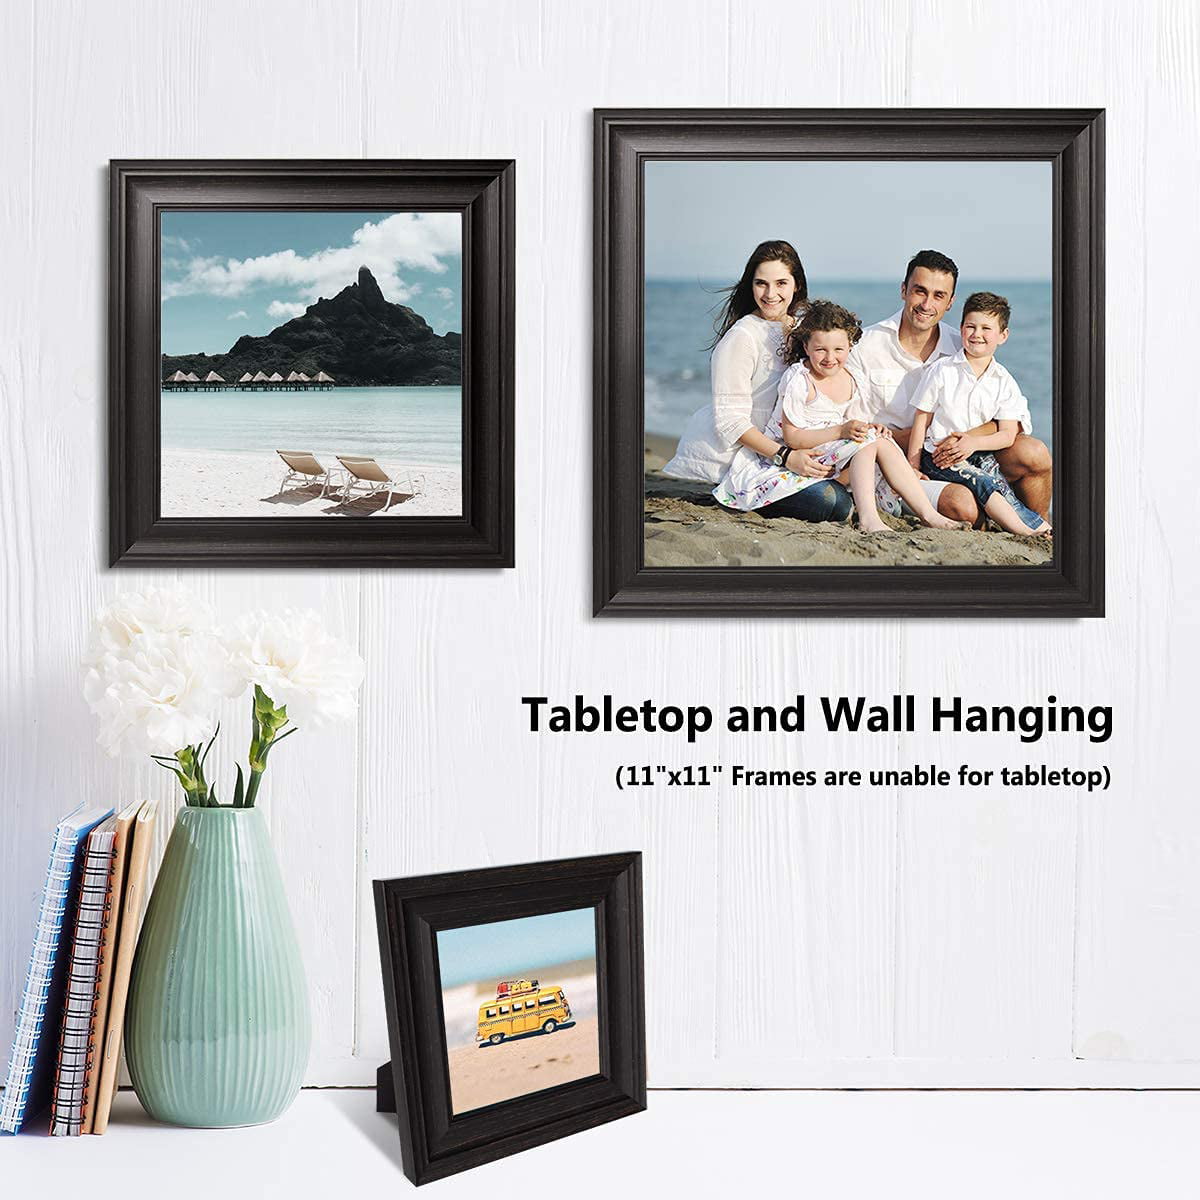 3 Pack, Black Wood Grain Rustic Photo Frame Set with High Definition Glass for Wall Mount Display LaVie Home 5x5 Picture Frames